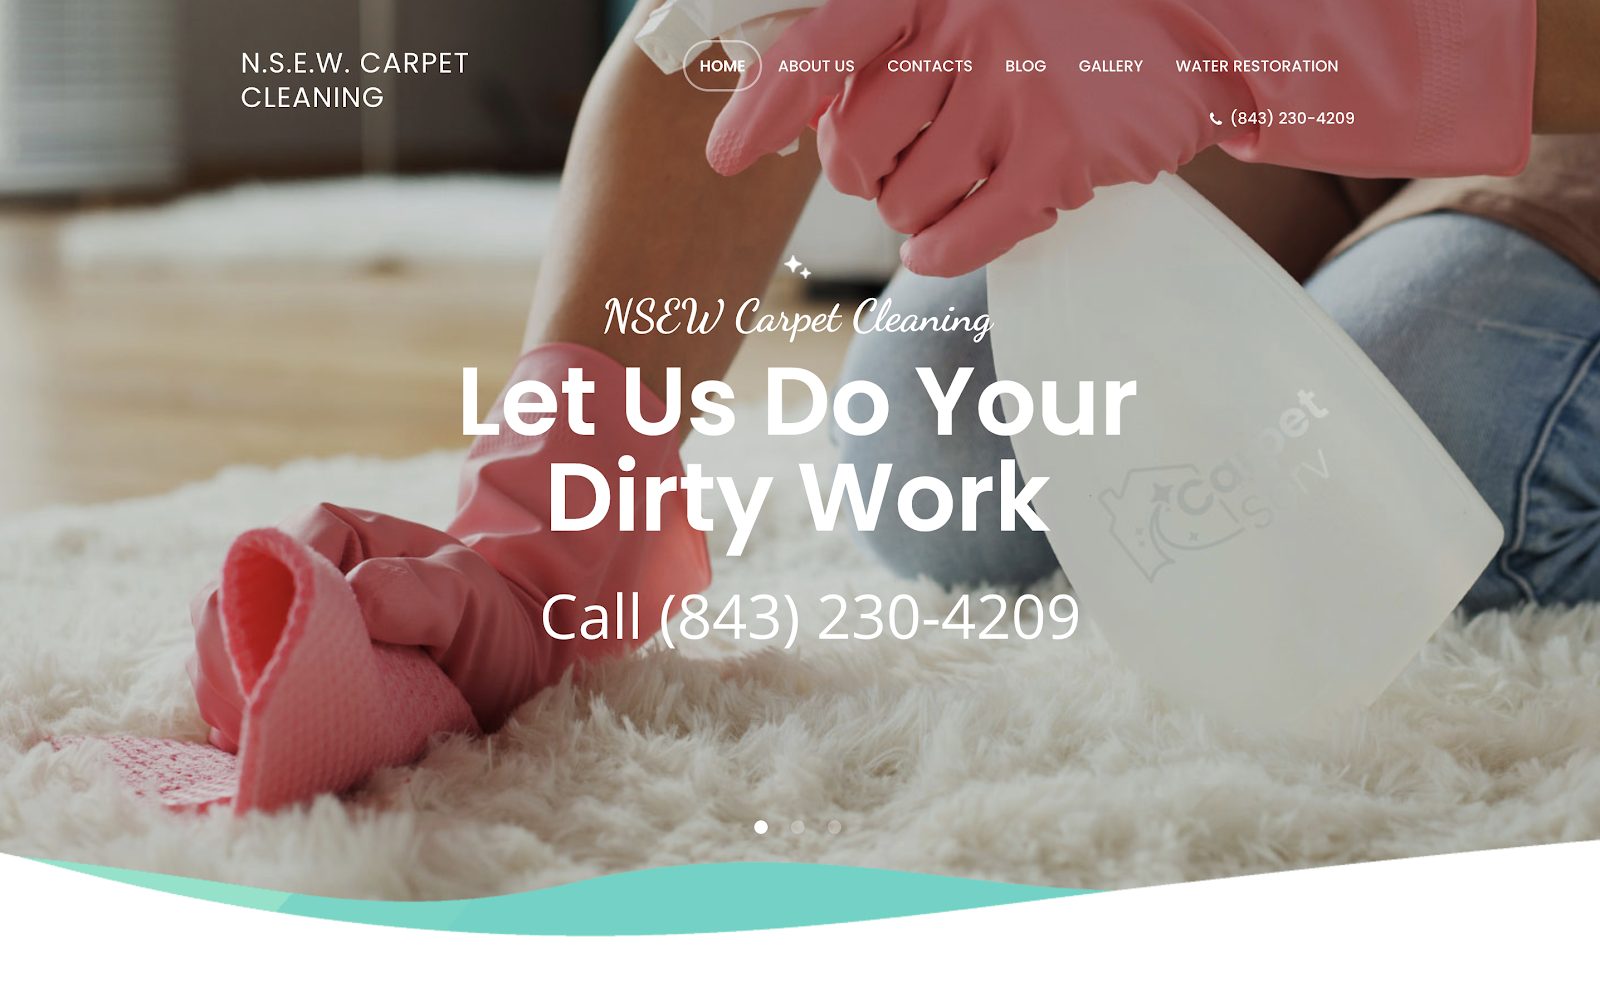 home page of NSEW Carpet Cleaning with lady cleaning a carpet